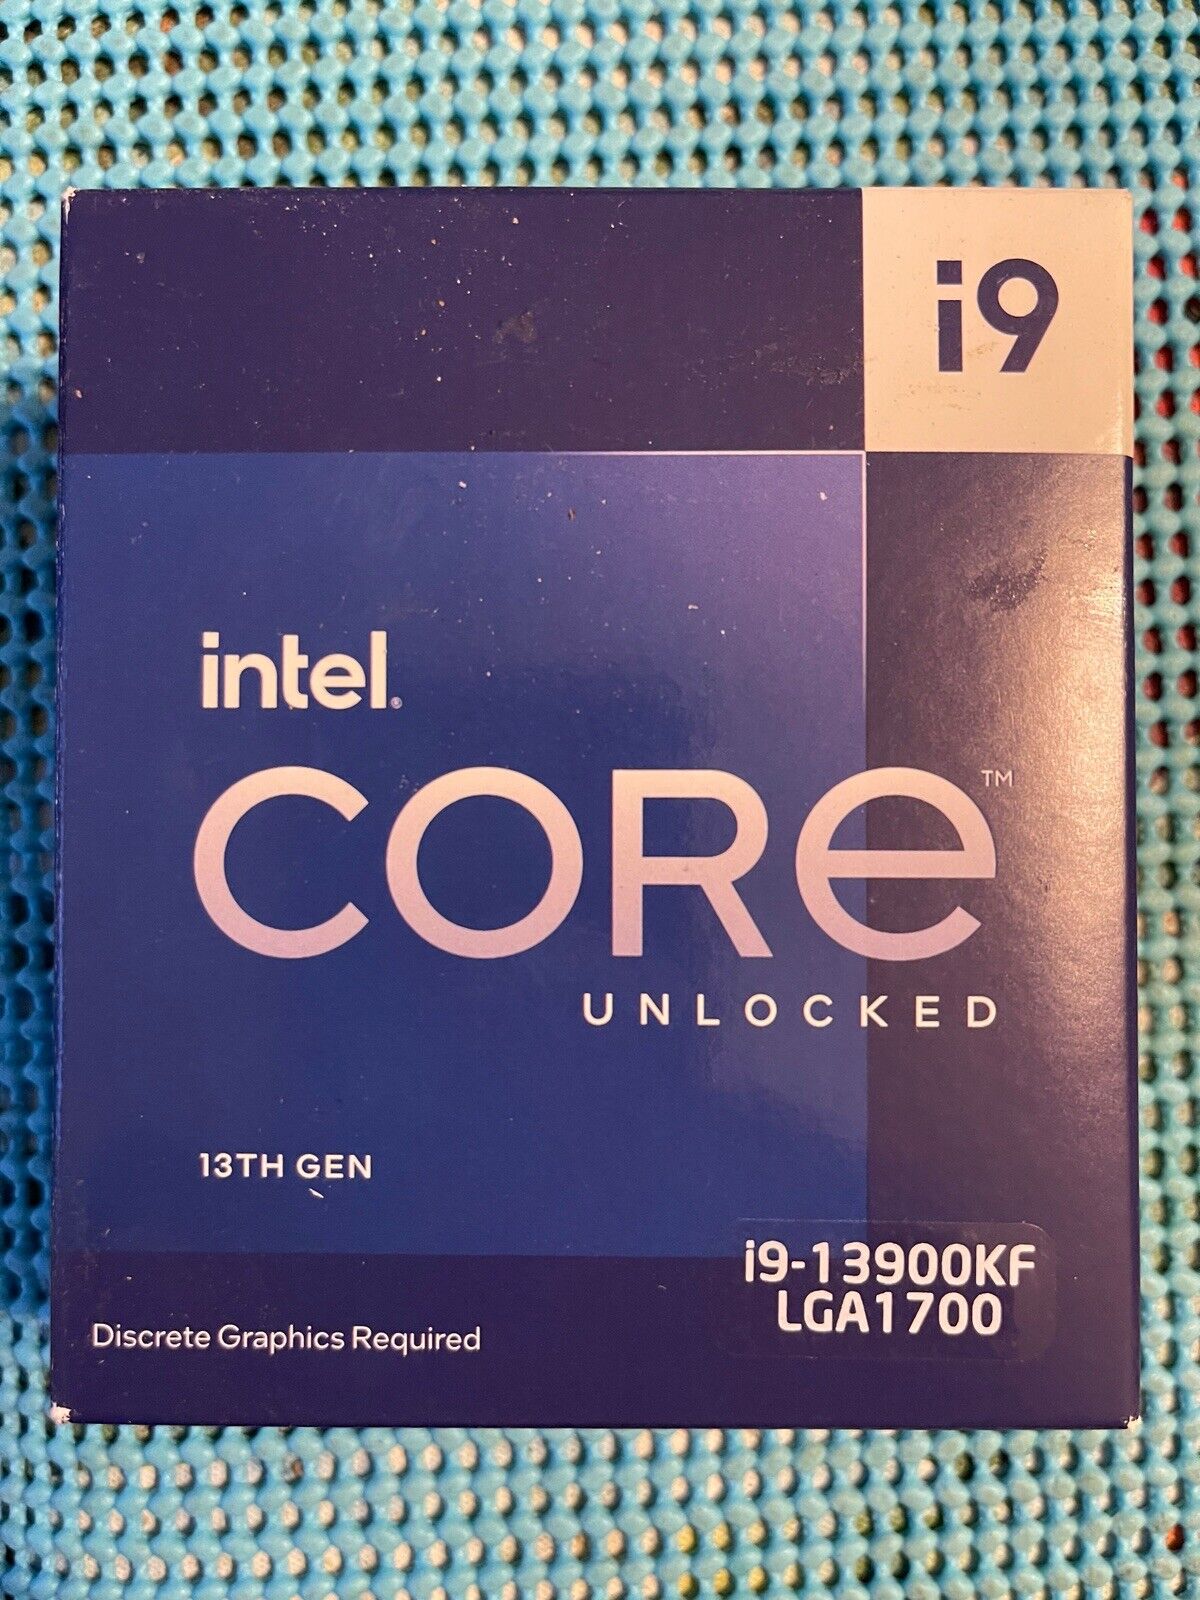 Intel Core i9-13900KF (BOX ONLY, FOR COLLECTORS) - NEW